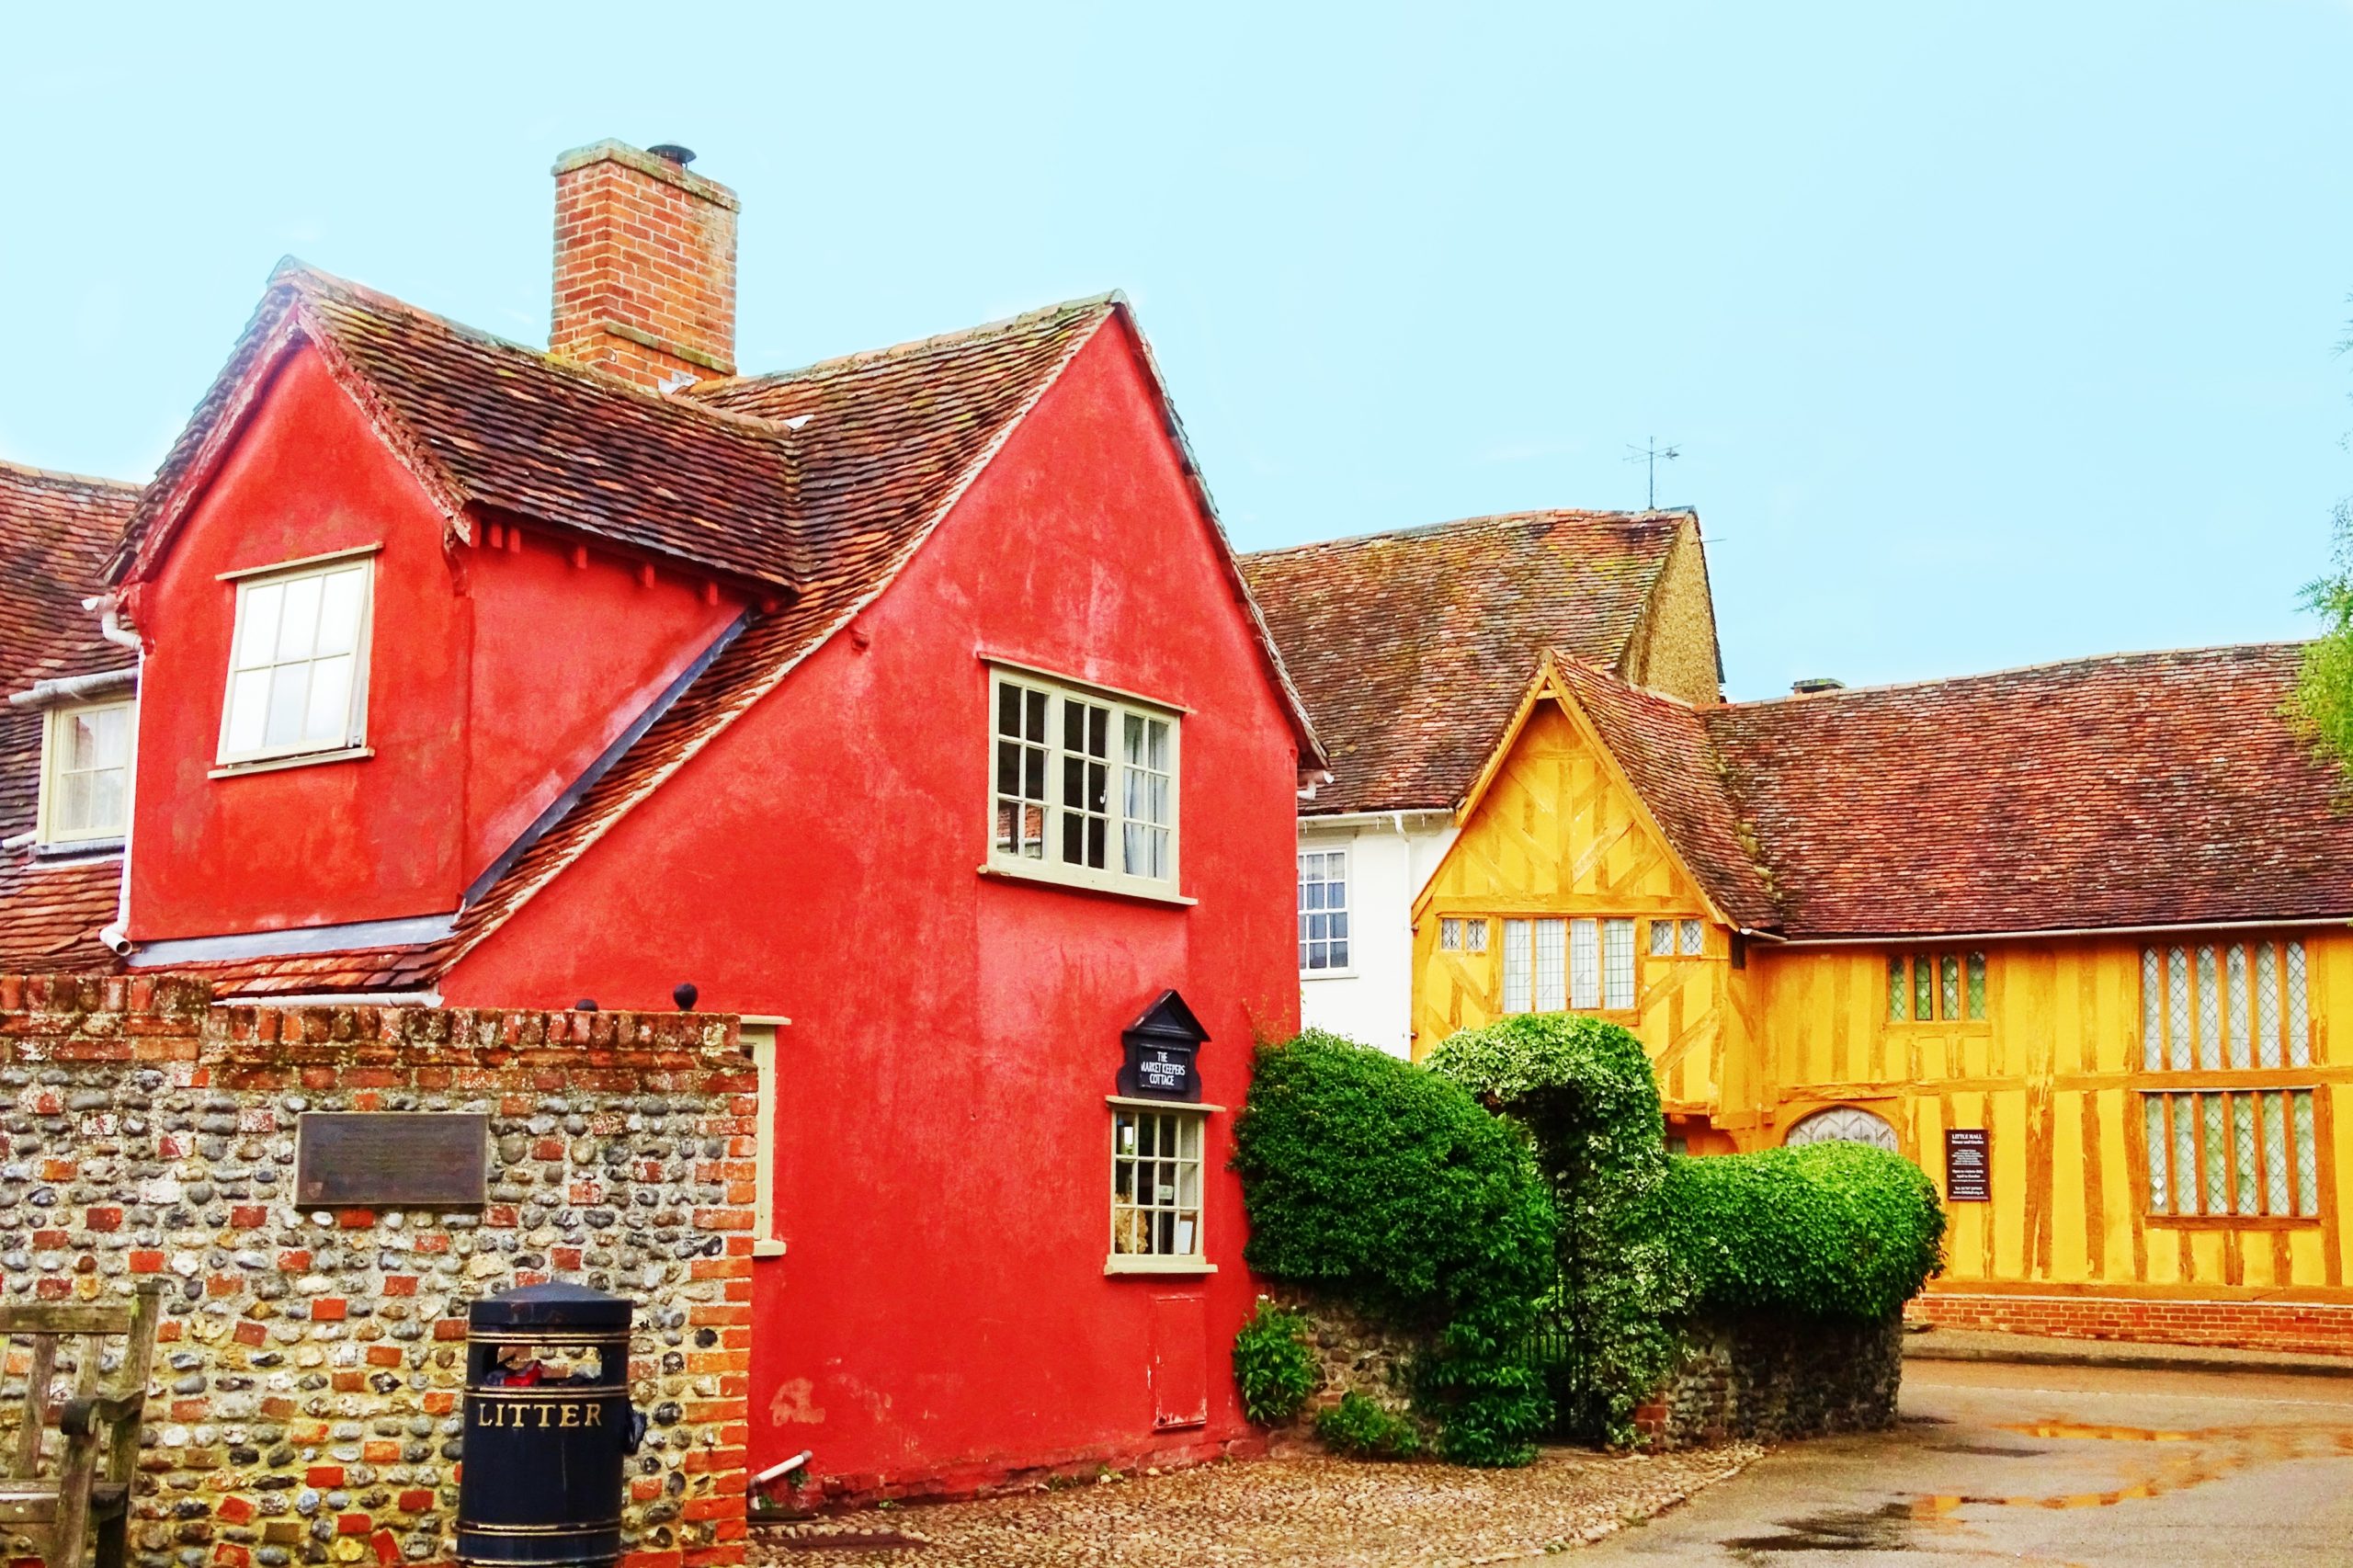 <img src="red.jpg" alt="red and yellow house in lavenham"/> 